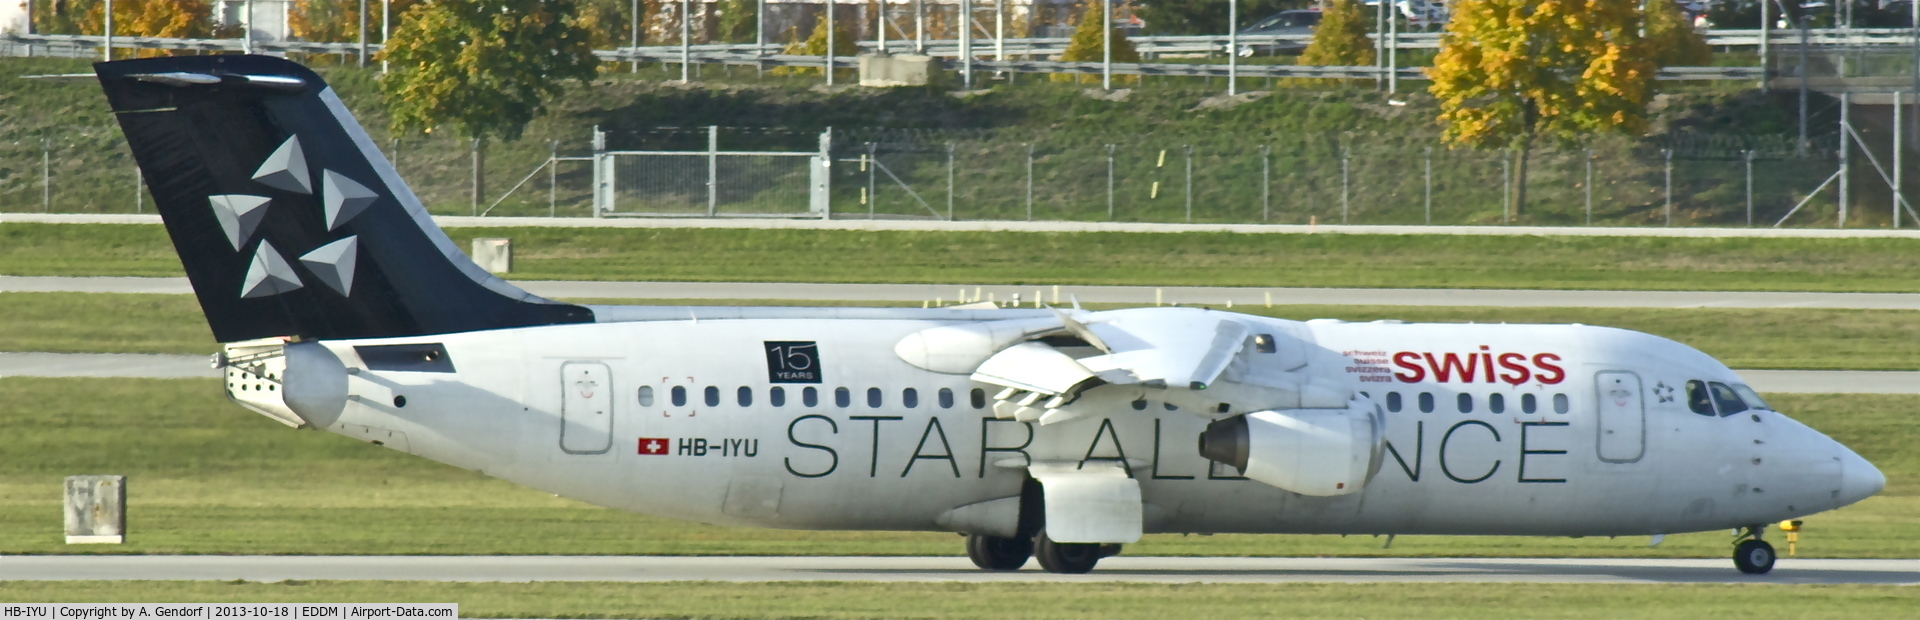 HB-IYU, 2000 British Aerospace Avro 146-RJ100 C/N E3379, Swiss (Star Alliance cs.), seen here on the taxiway, shortly after landing at München(EDDM)